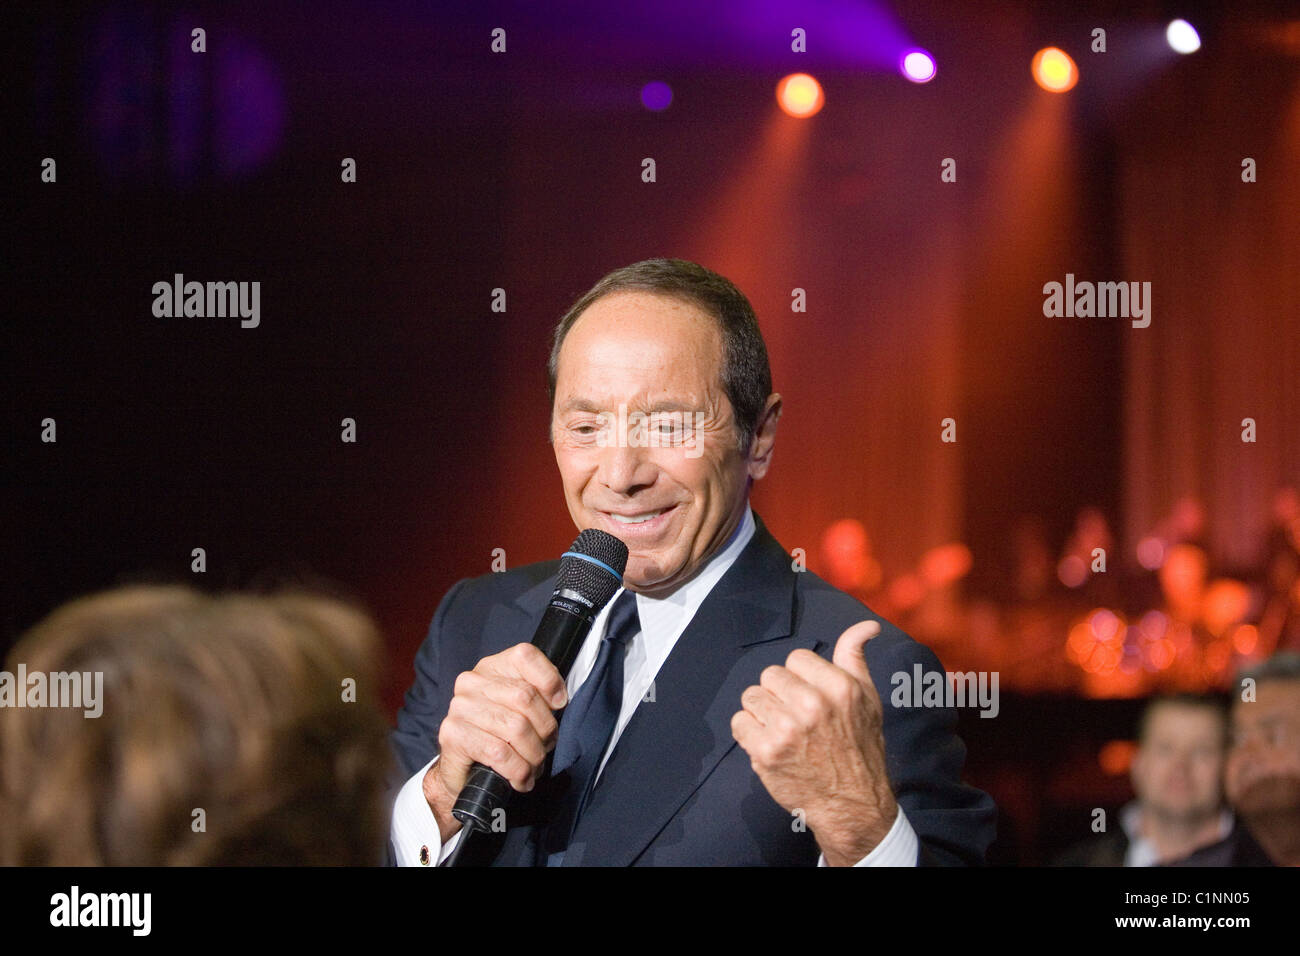 Paul Anka perform on the concert in Budapest, Hungary, 2010. Stock Photo